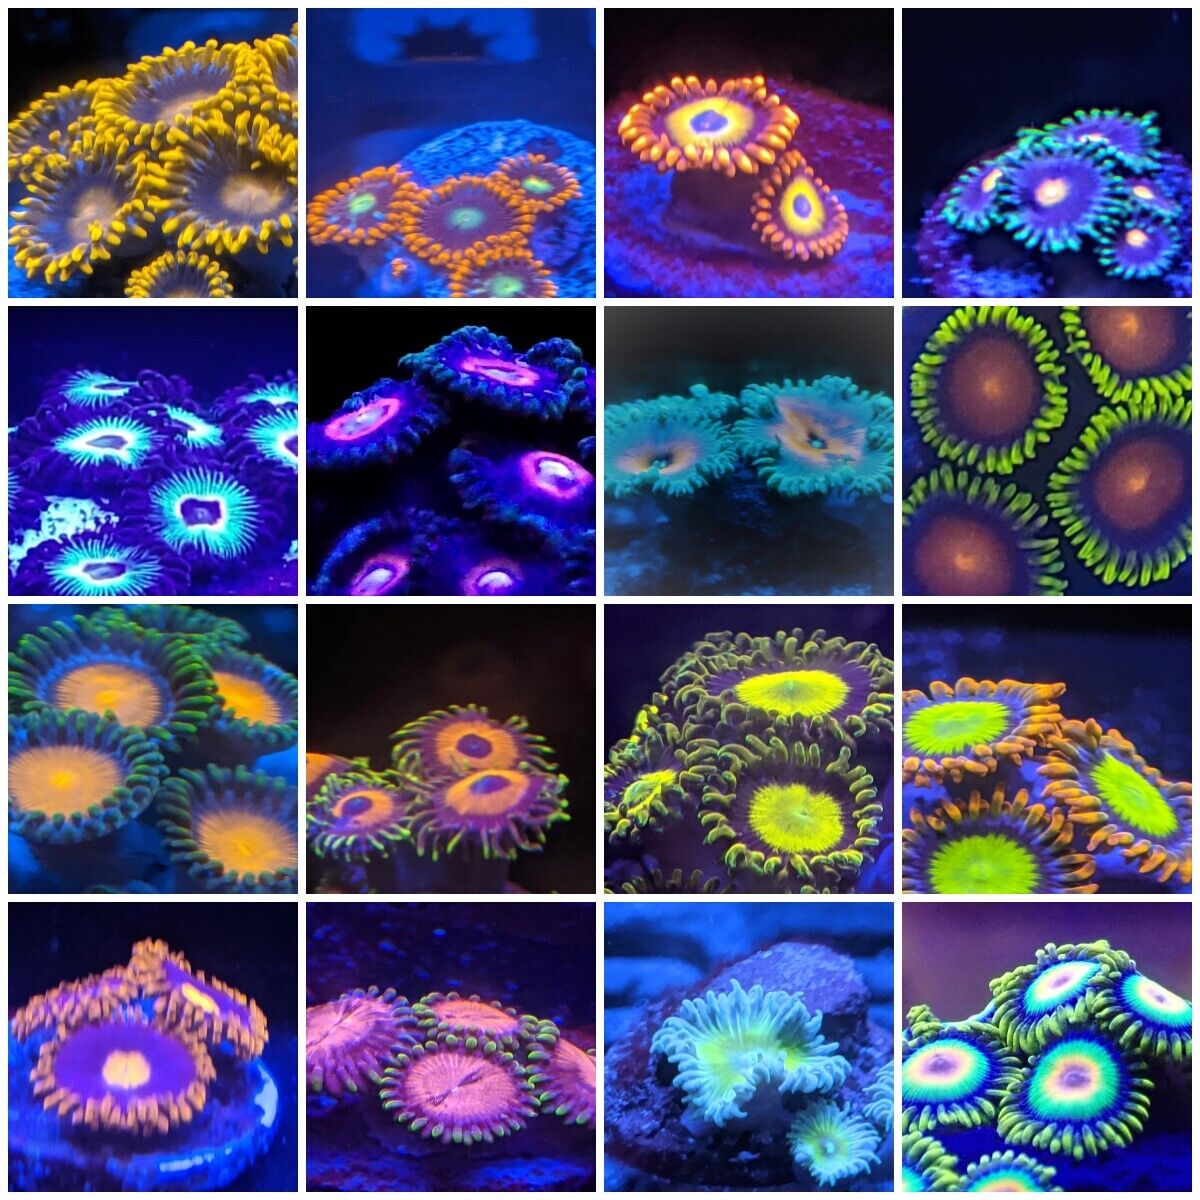 Zoa Pack of 8 different Types of Colorful Zoa by Zoa.World with 